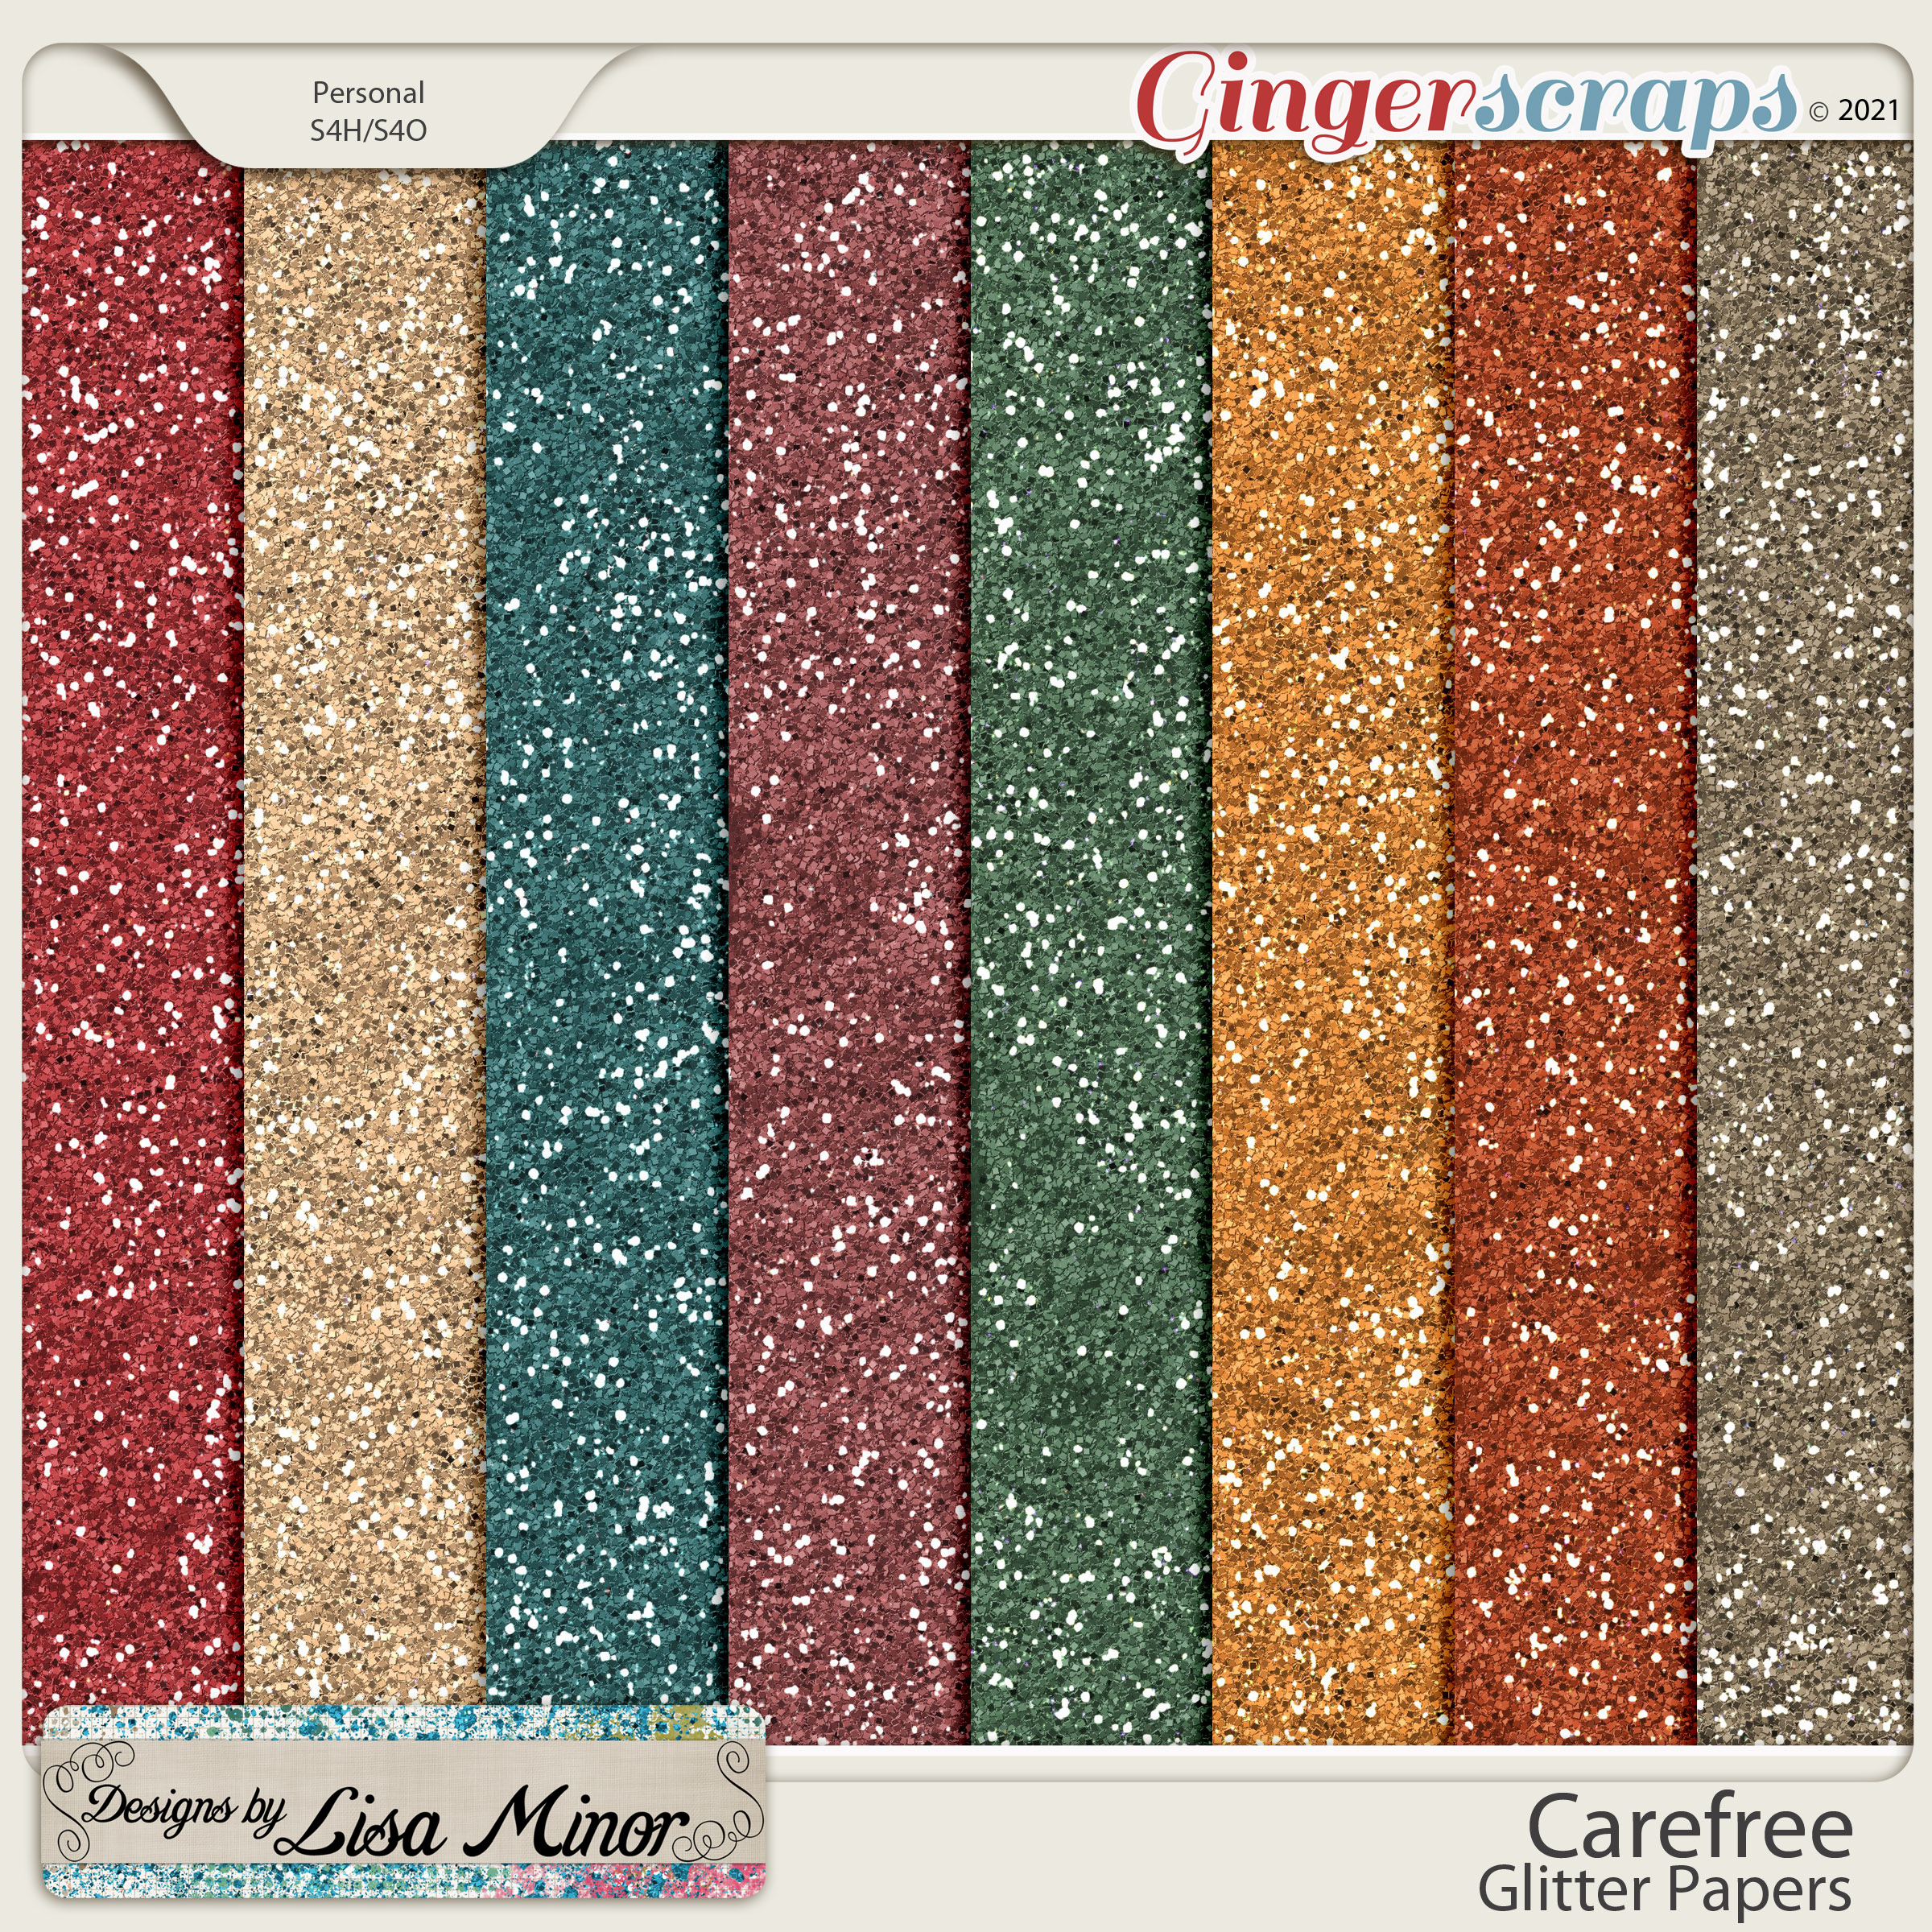 Carefree Glitter Papers from Designs by Lisa Minor